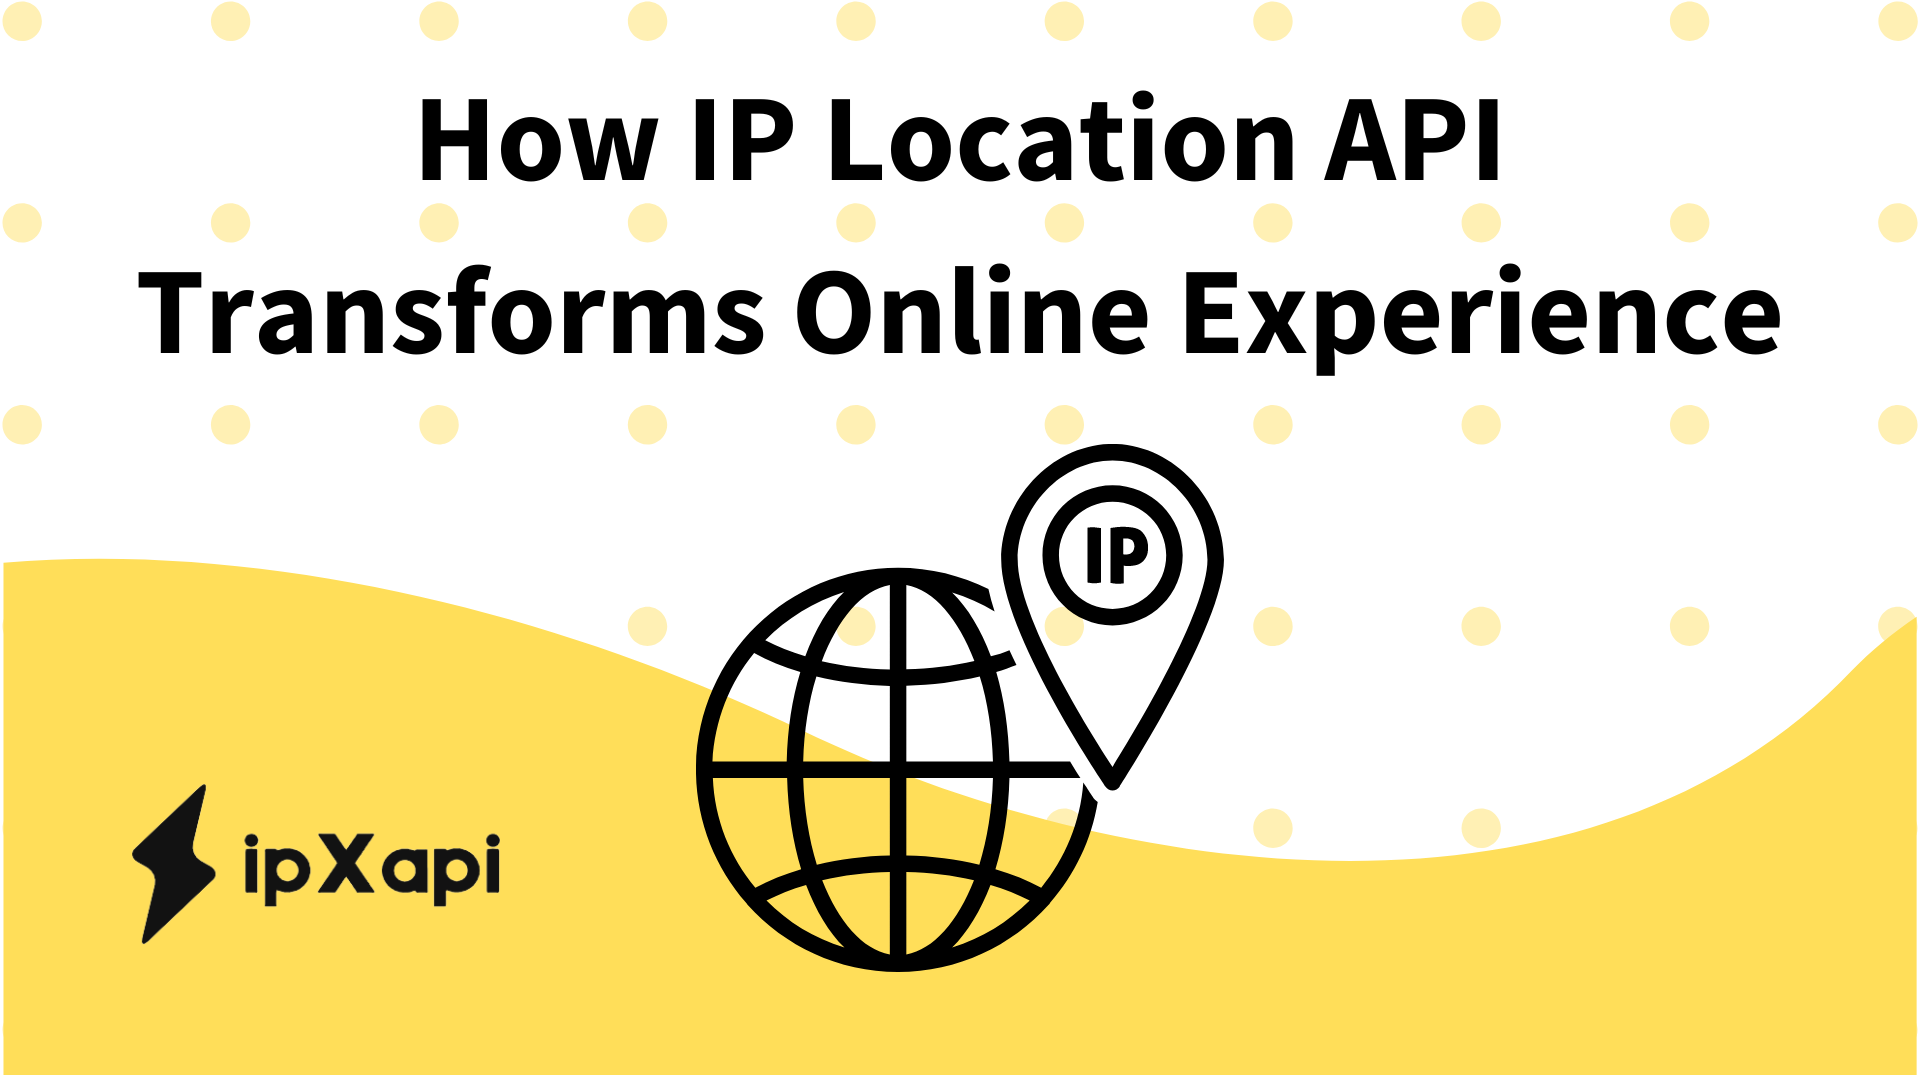 How IP Location API Transforms Online Experience